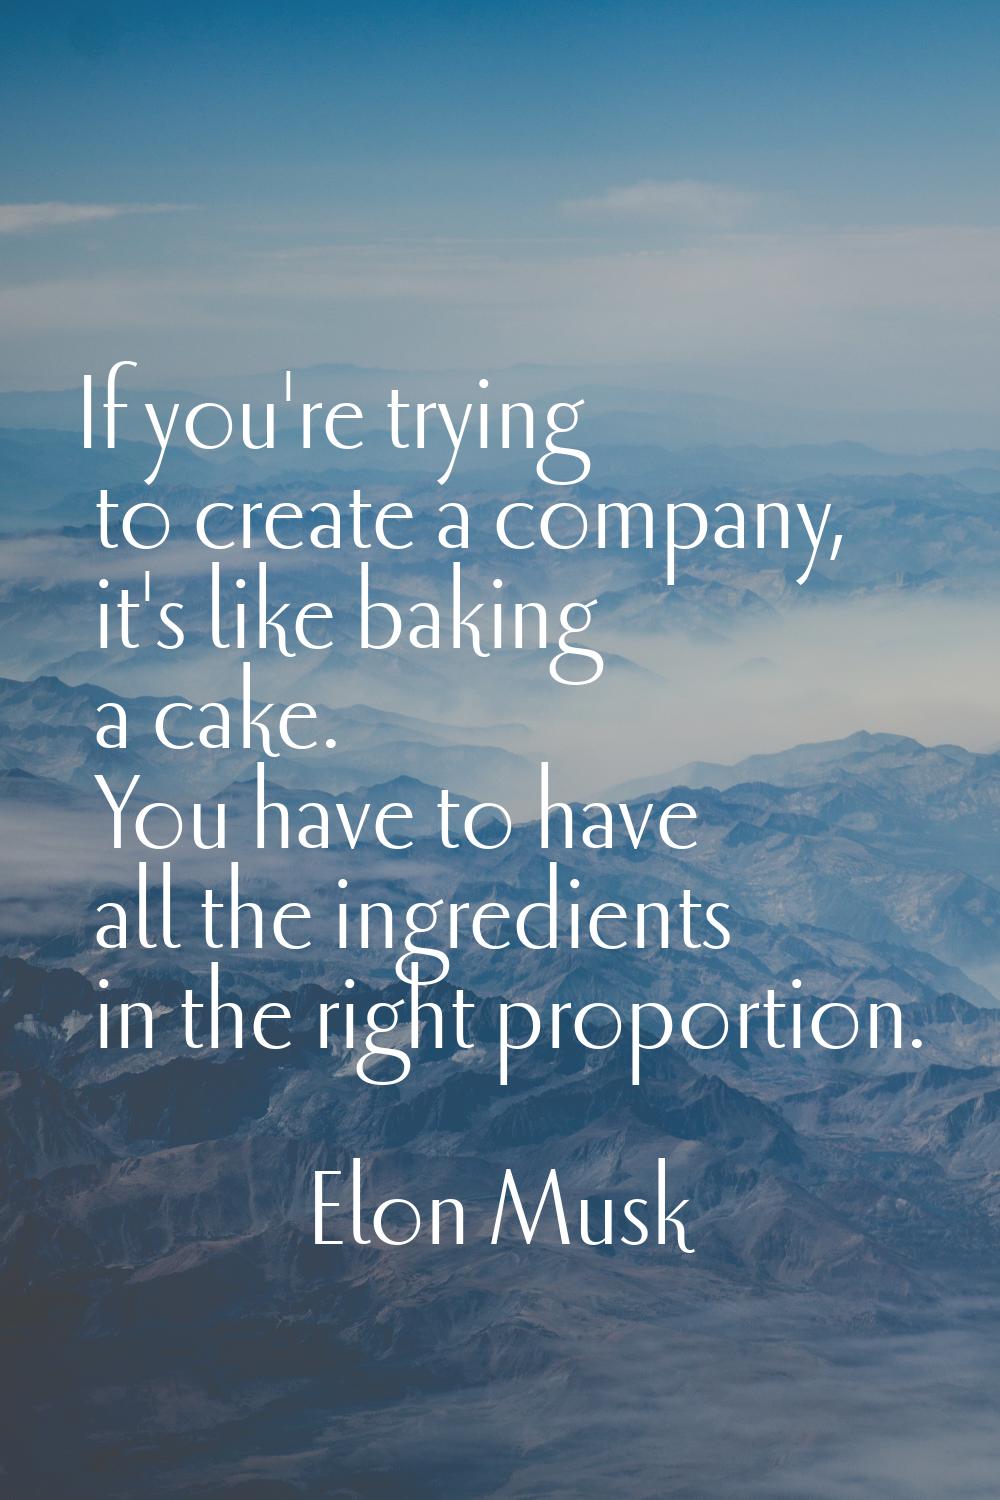 If you're trying to create a company, it's like baking a cake. You have to have all the ingredients